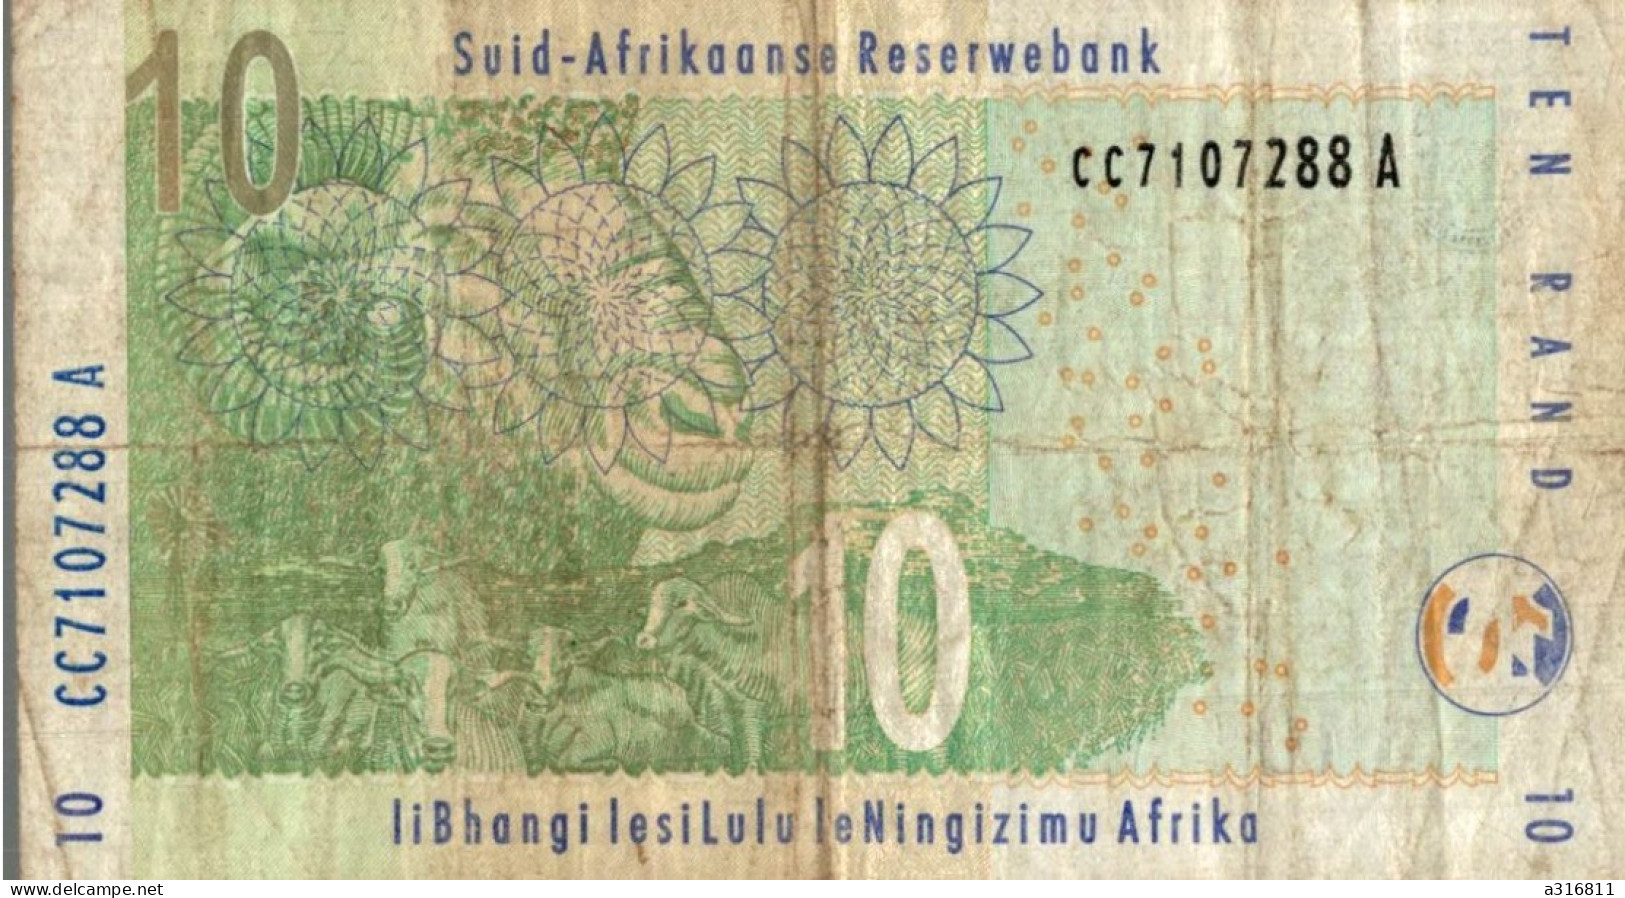 SOUTH AFRICA - SOUTH AFRICAN RESERVE BANK - Suráfrica